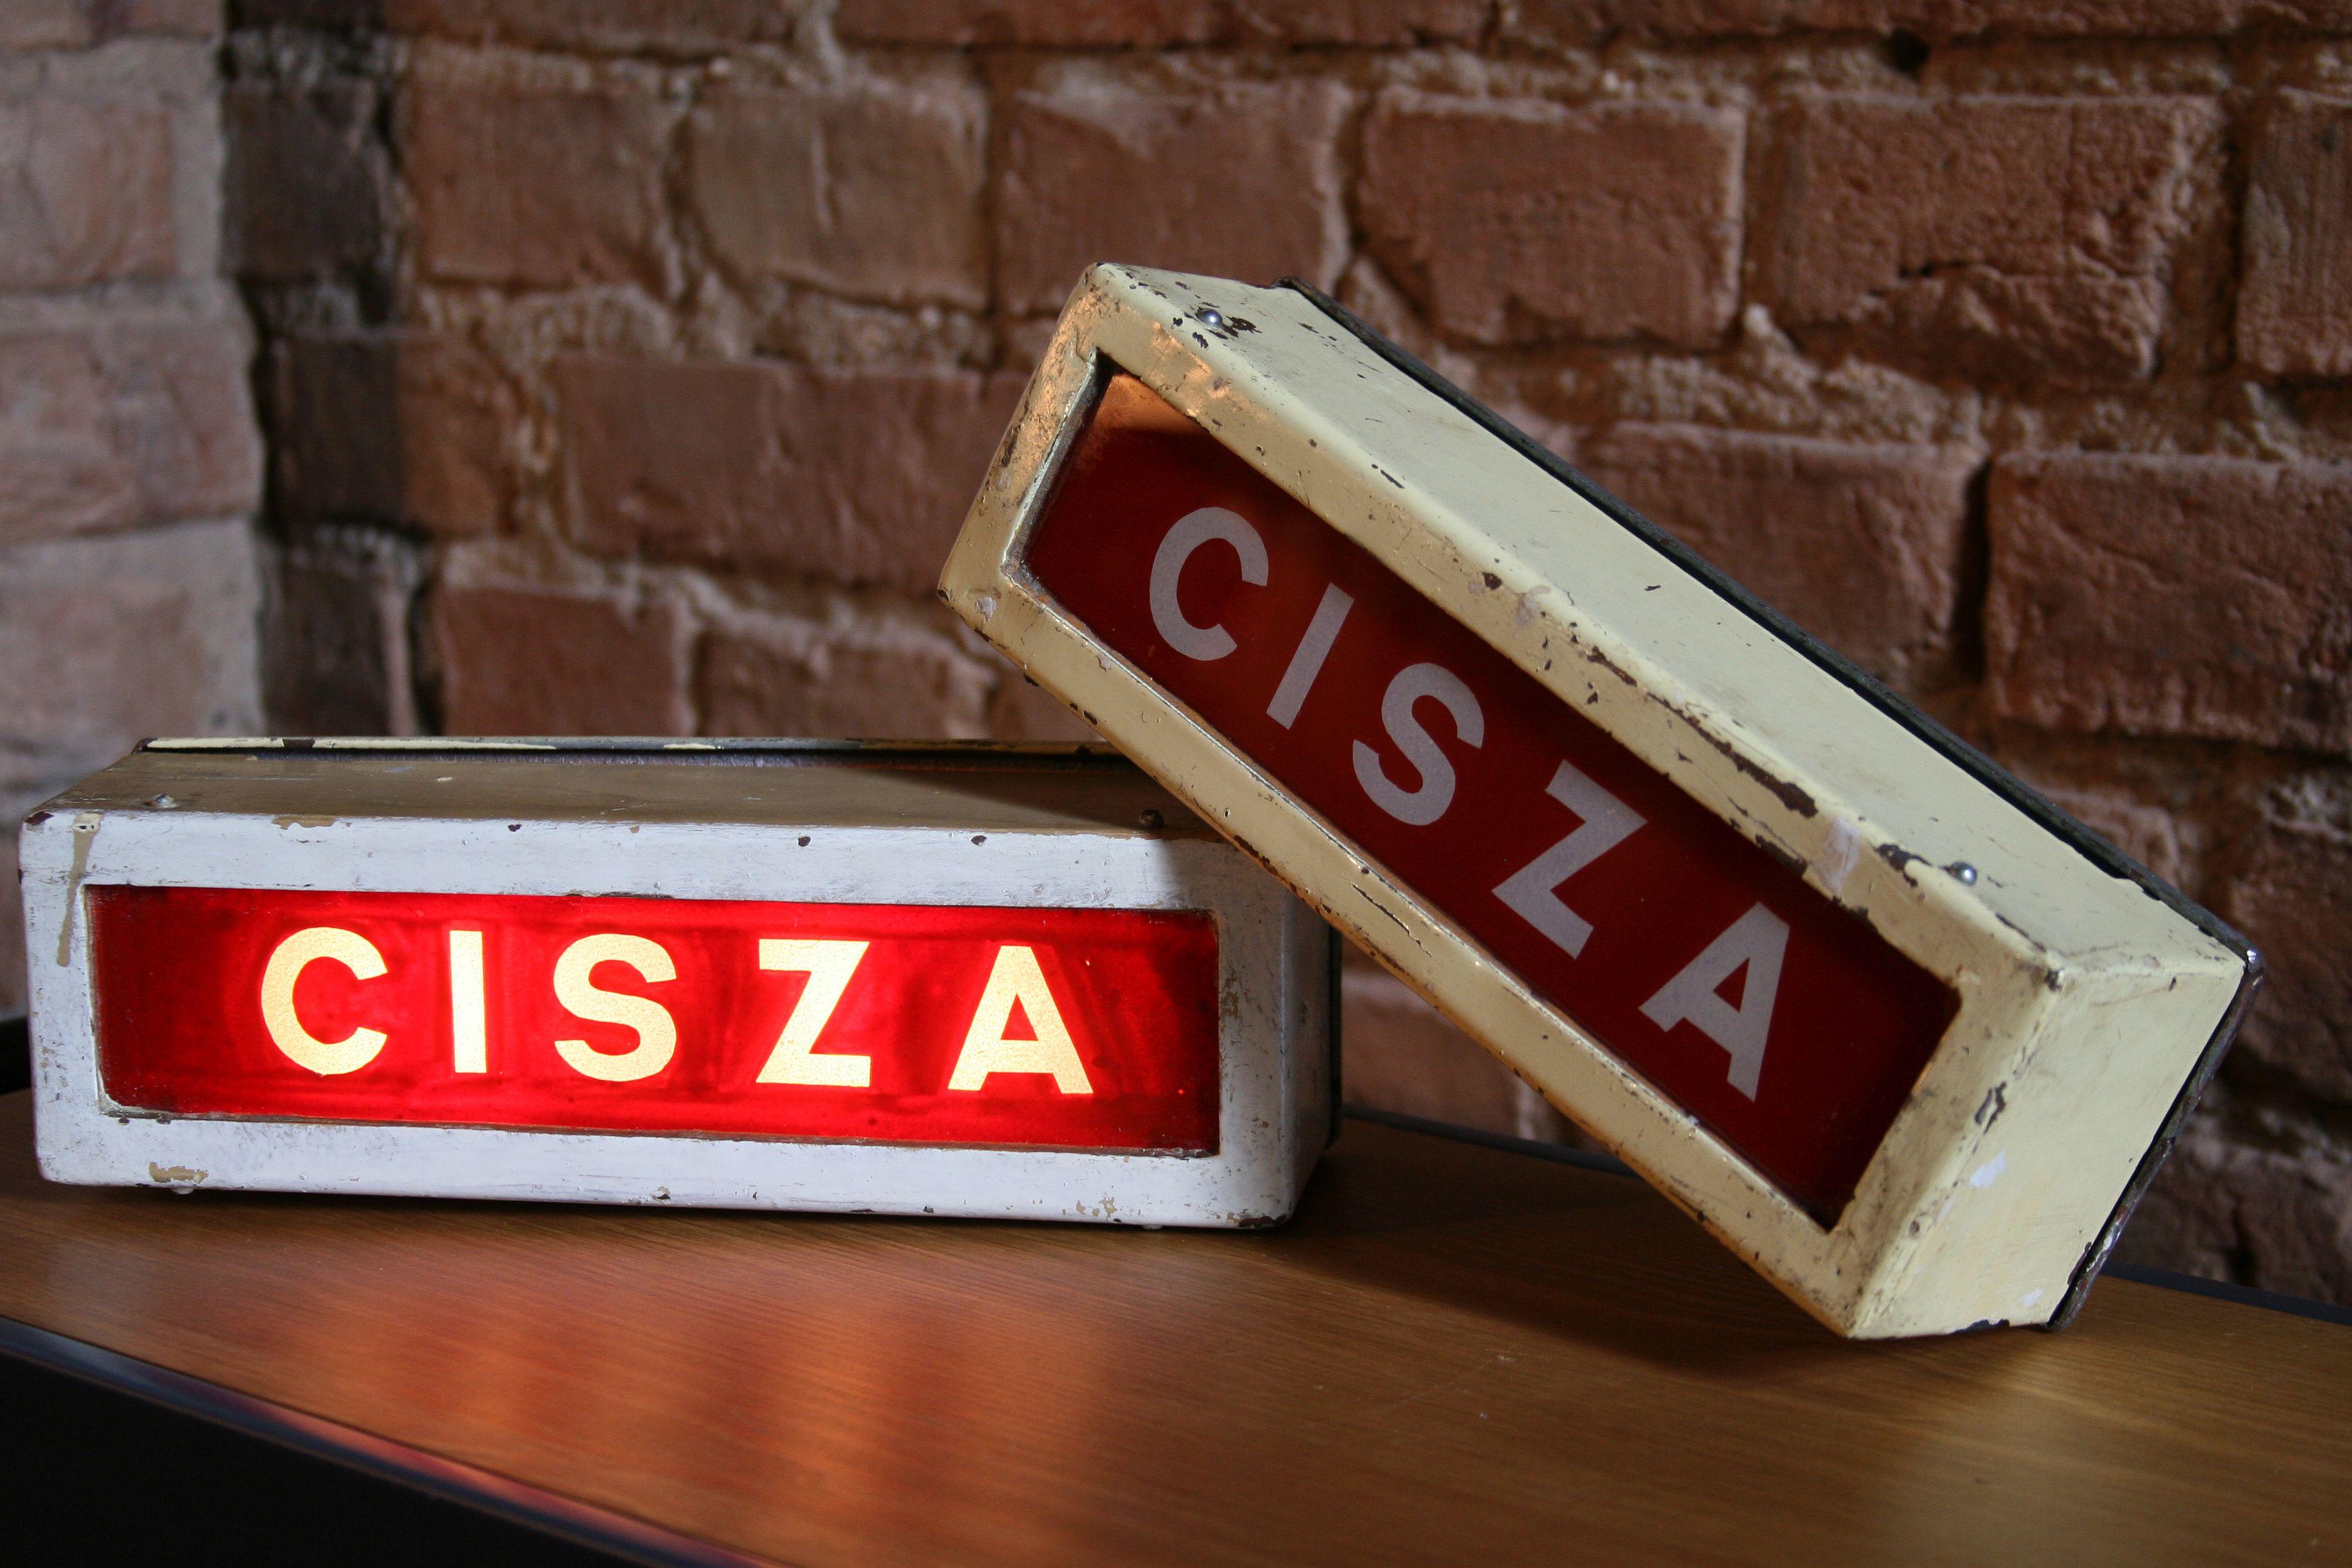 Steel 1950s Illuminated Theater Sign “Cisza”, Meaning “Silence” For Sale